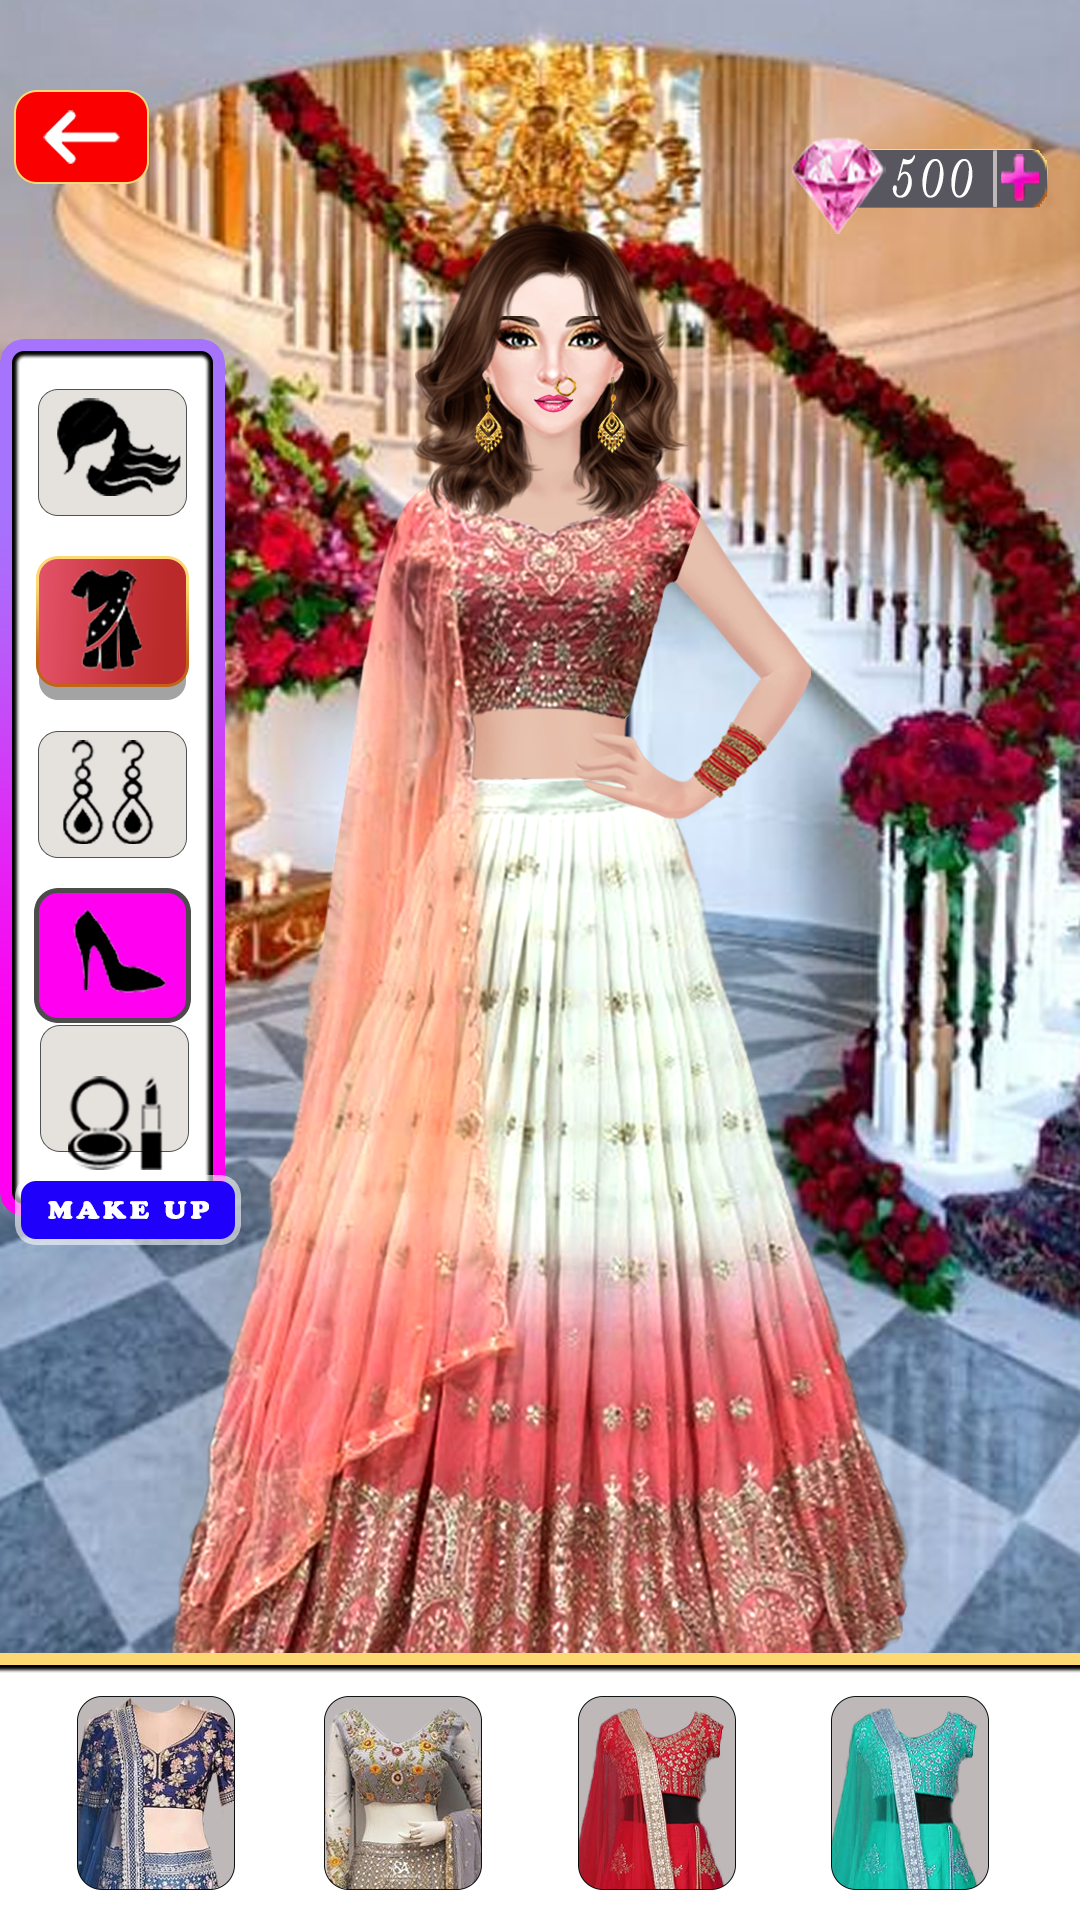 Indian Wedding: DressUp Makeup - Apps on Google Play